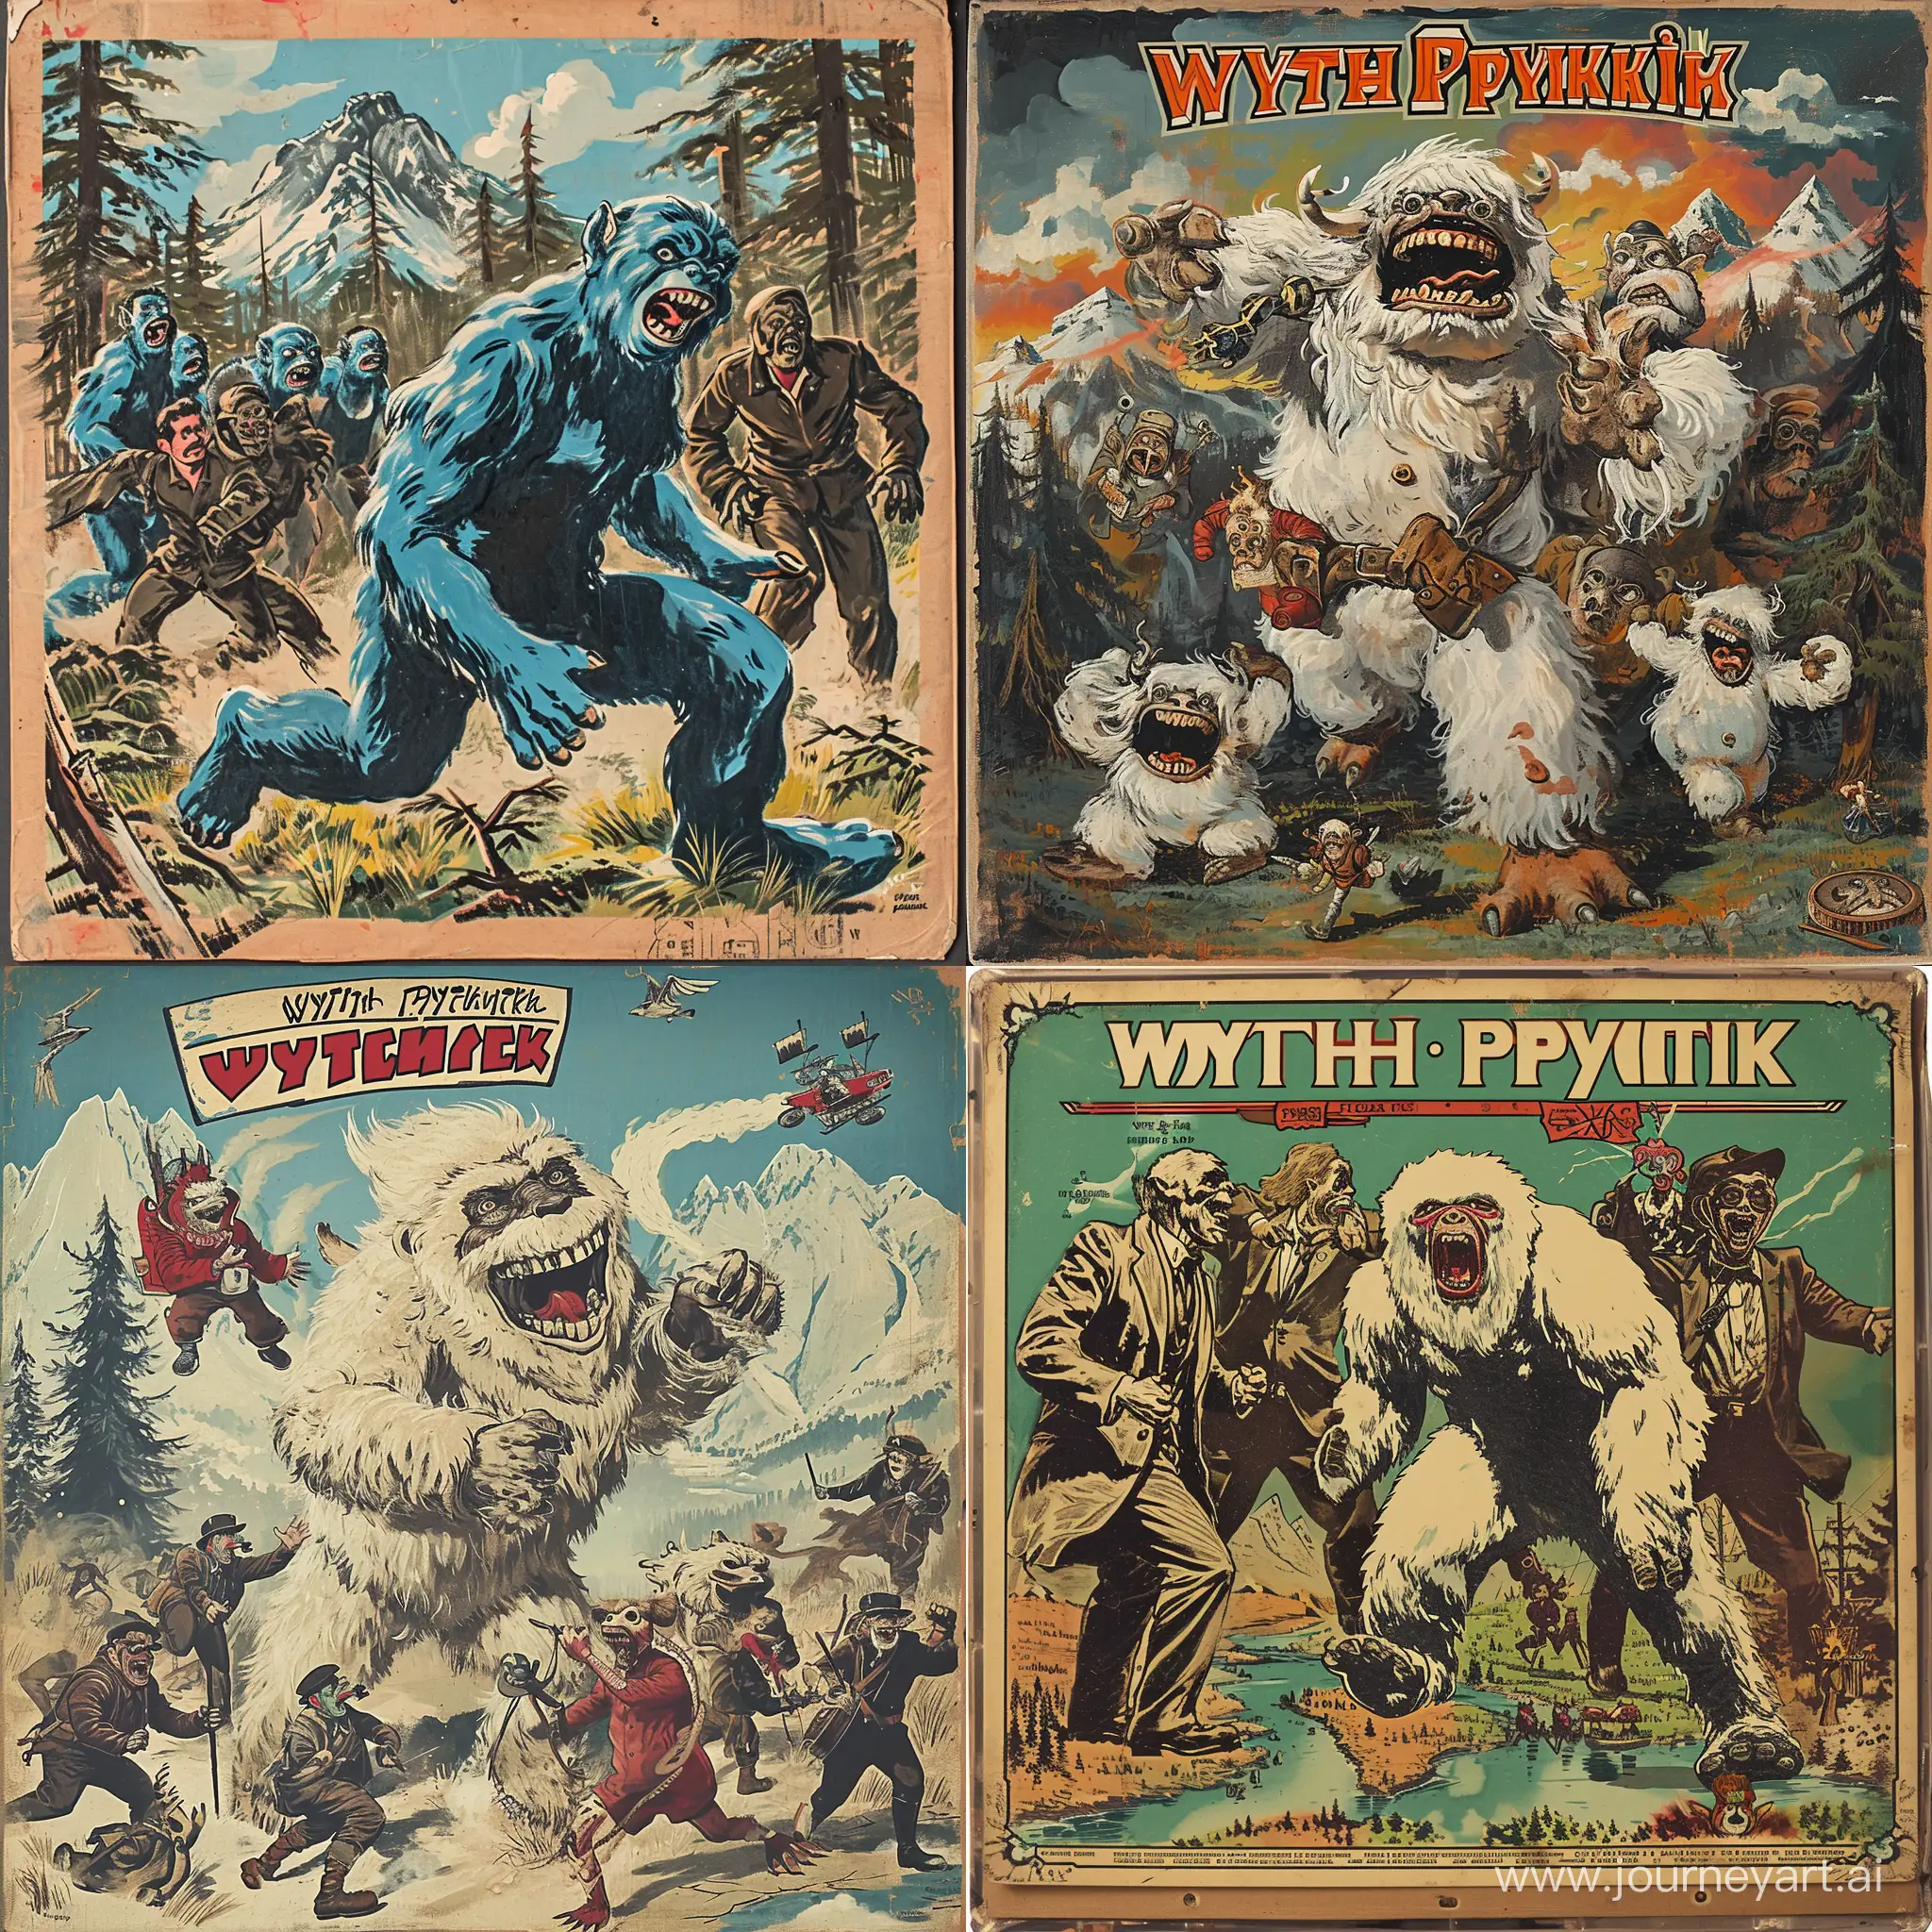 Create the image: An album cover for the band "wytch pycknyck" the album is called "Fröstbite", its about a group of yeti invading north america, in the style of a 30s comic, painted